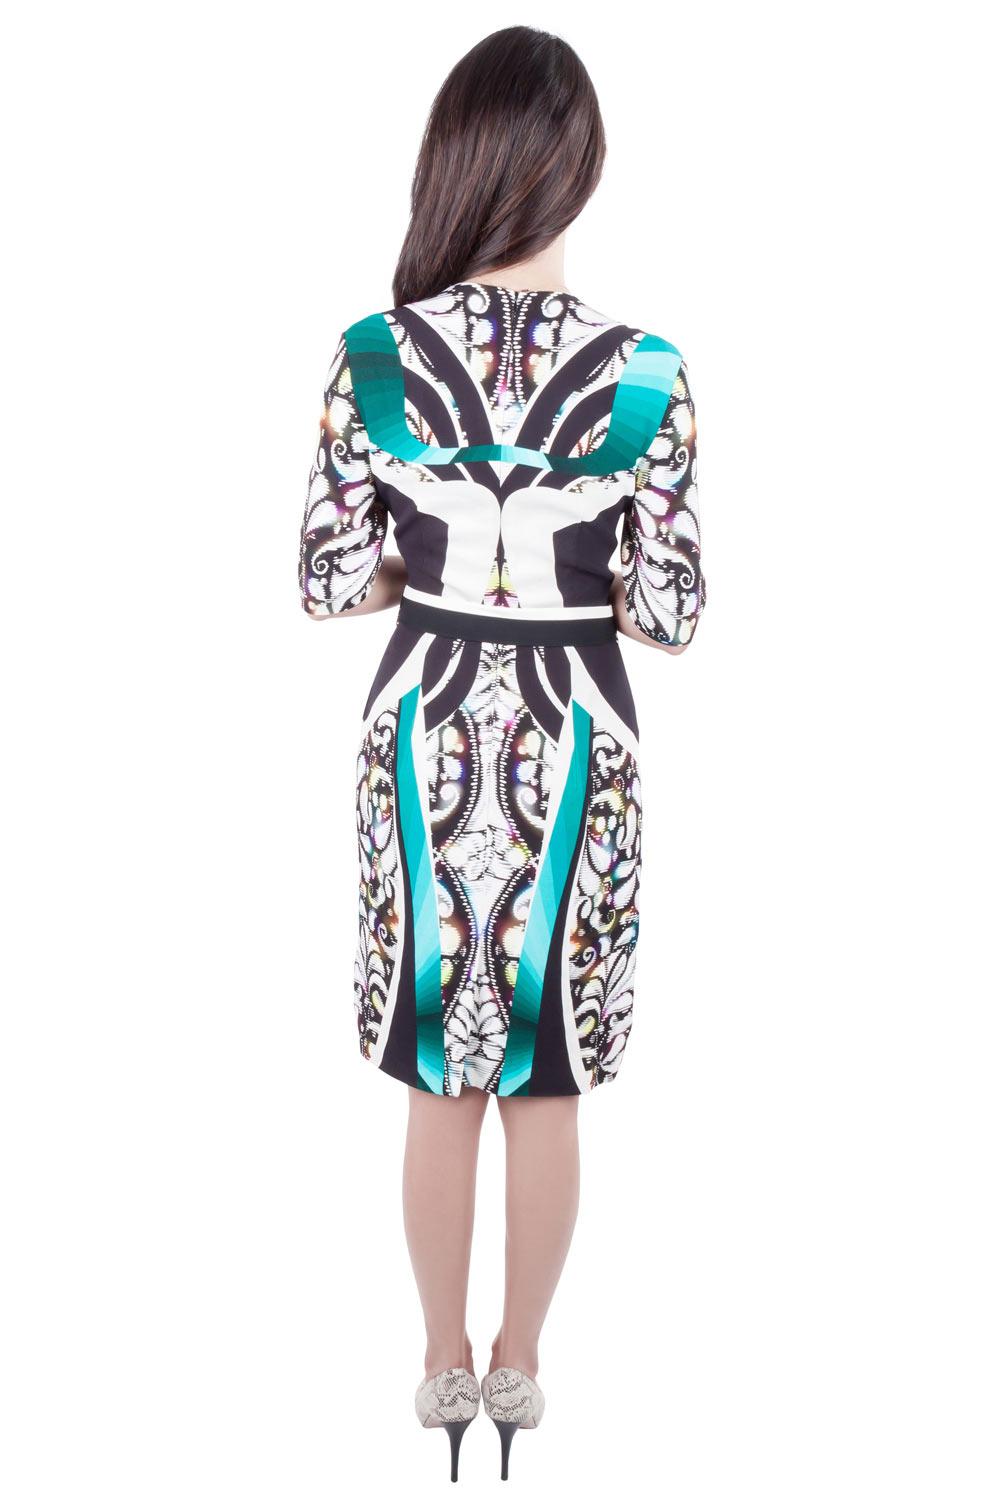 Designed by Peter Pilotto, this sheath dress was launched as part of the Fall 2013 collection. Featuring a digital print, the multicolor creation comes with a belted detail, short sleeves and zip closure. It is simple yet very unique.

Includes: The